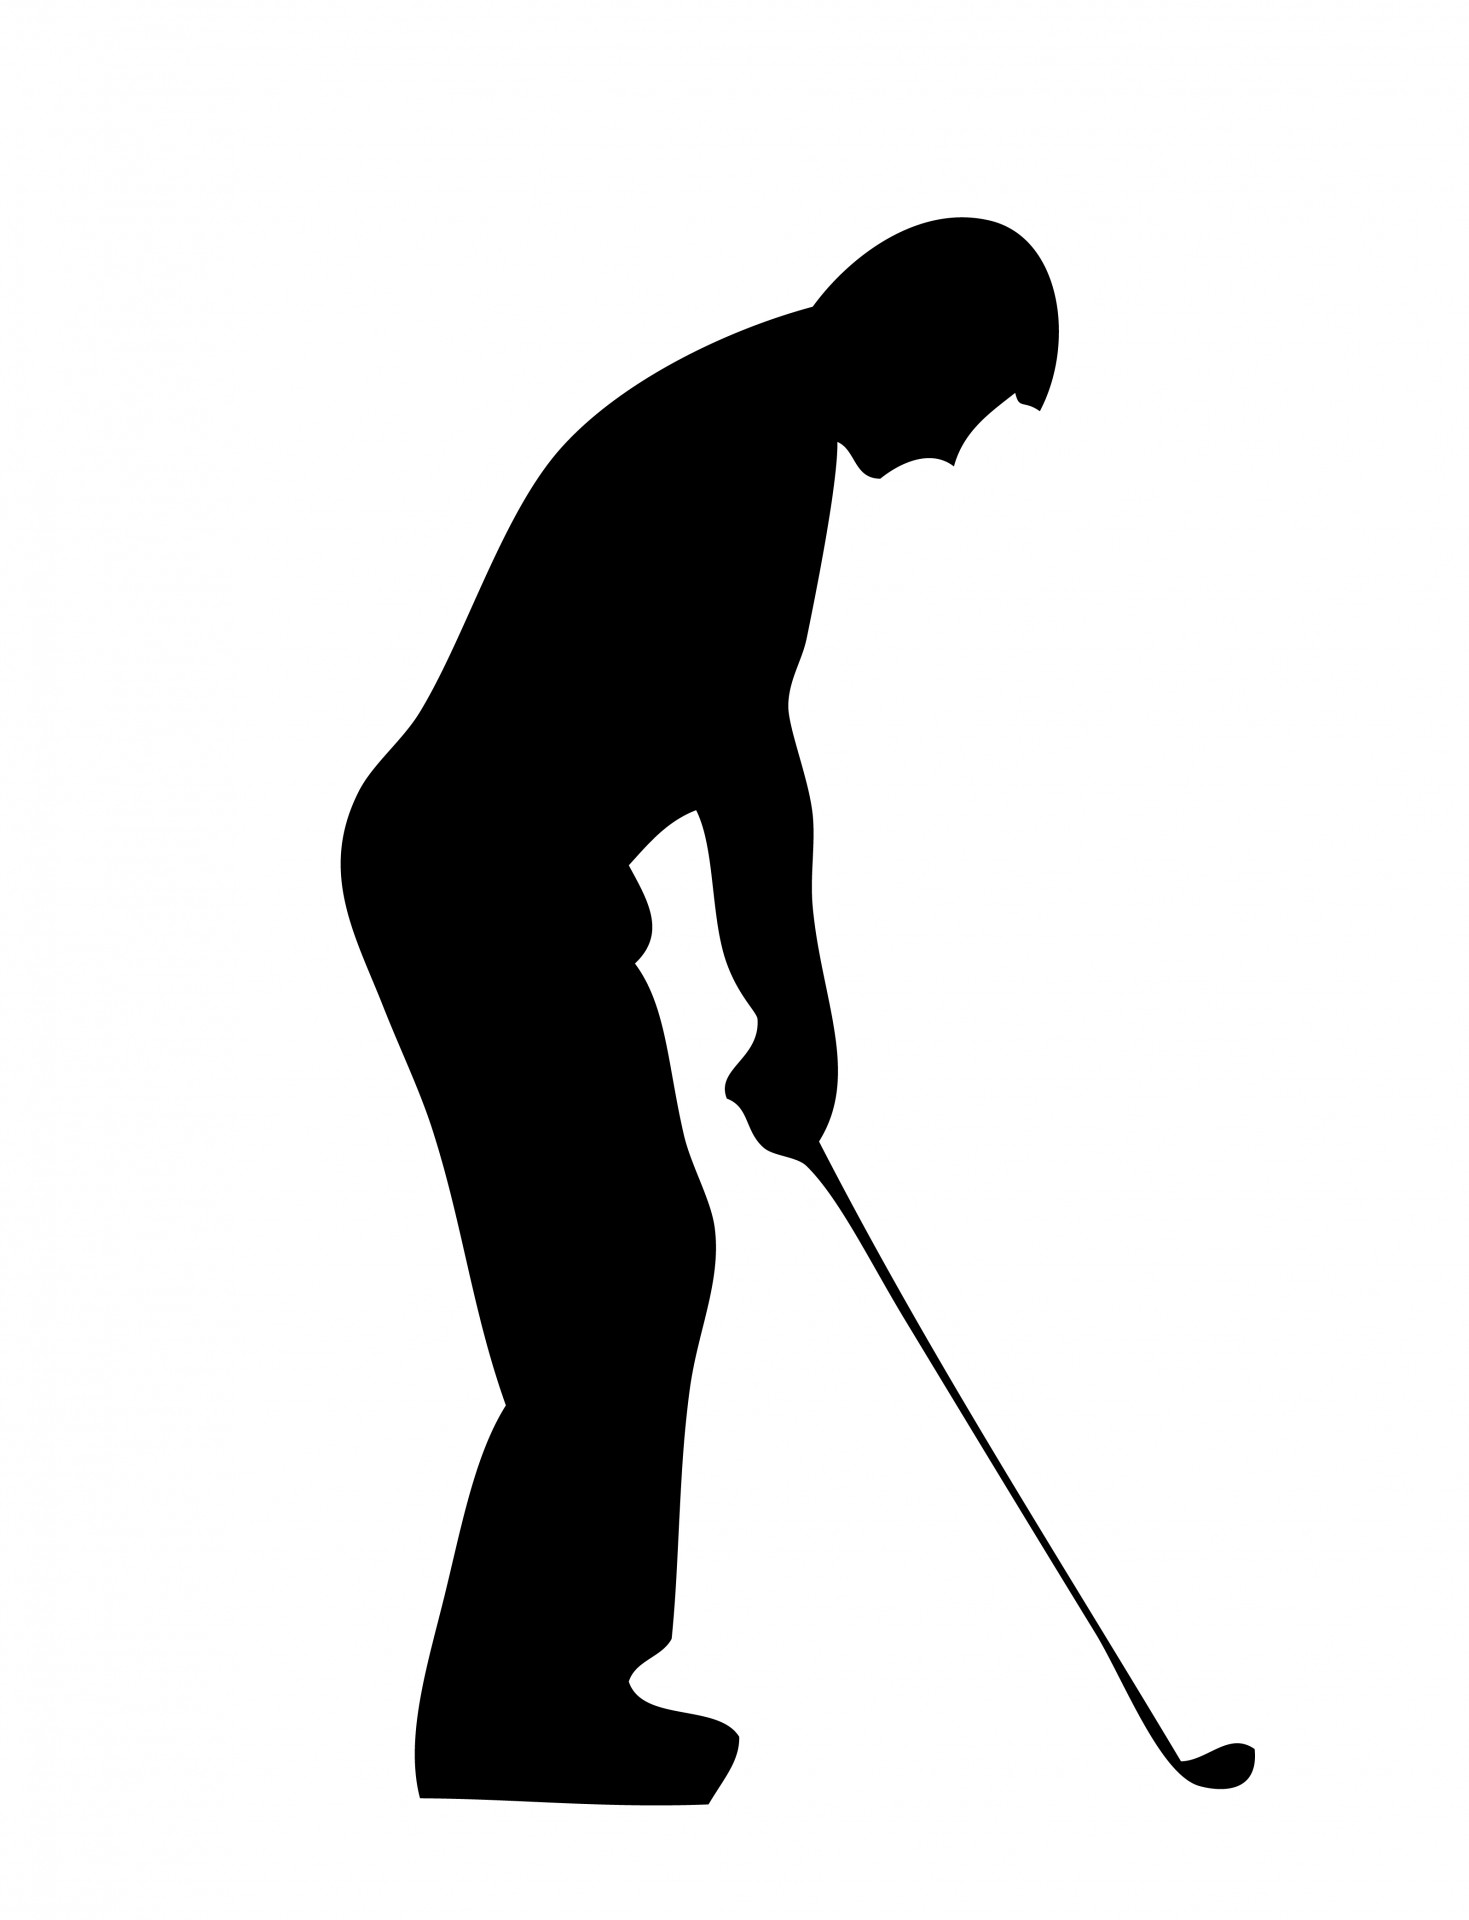 Golfer golf player silhouette clipart free stock photo public domain